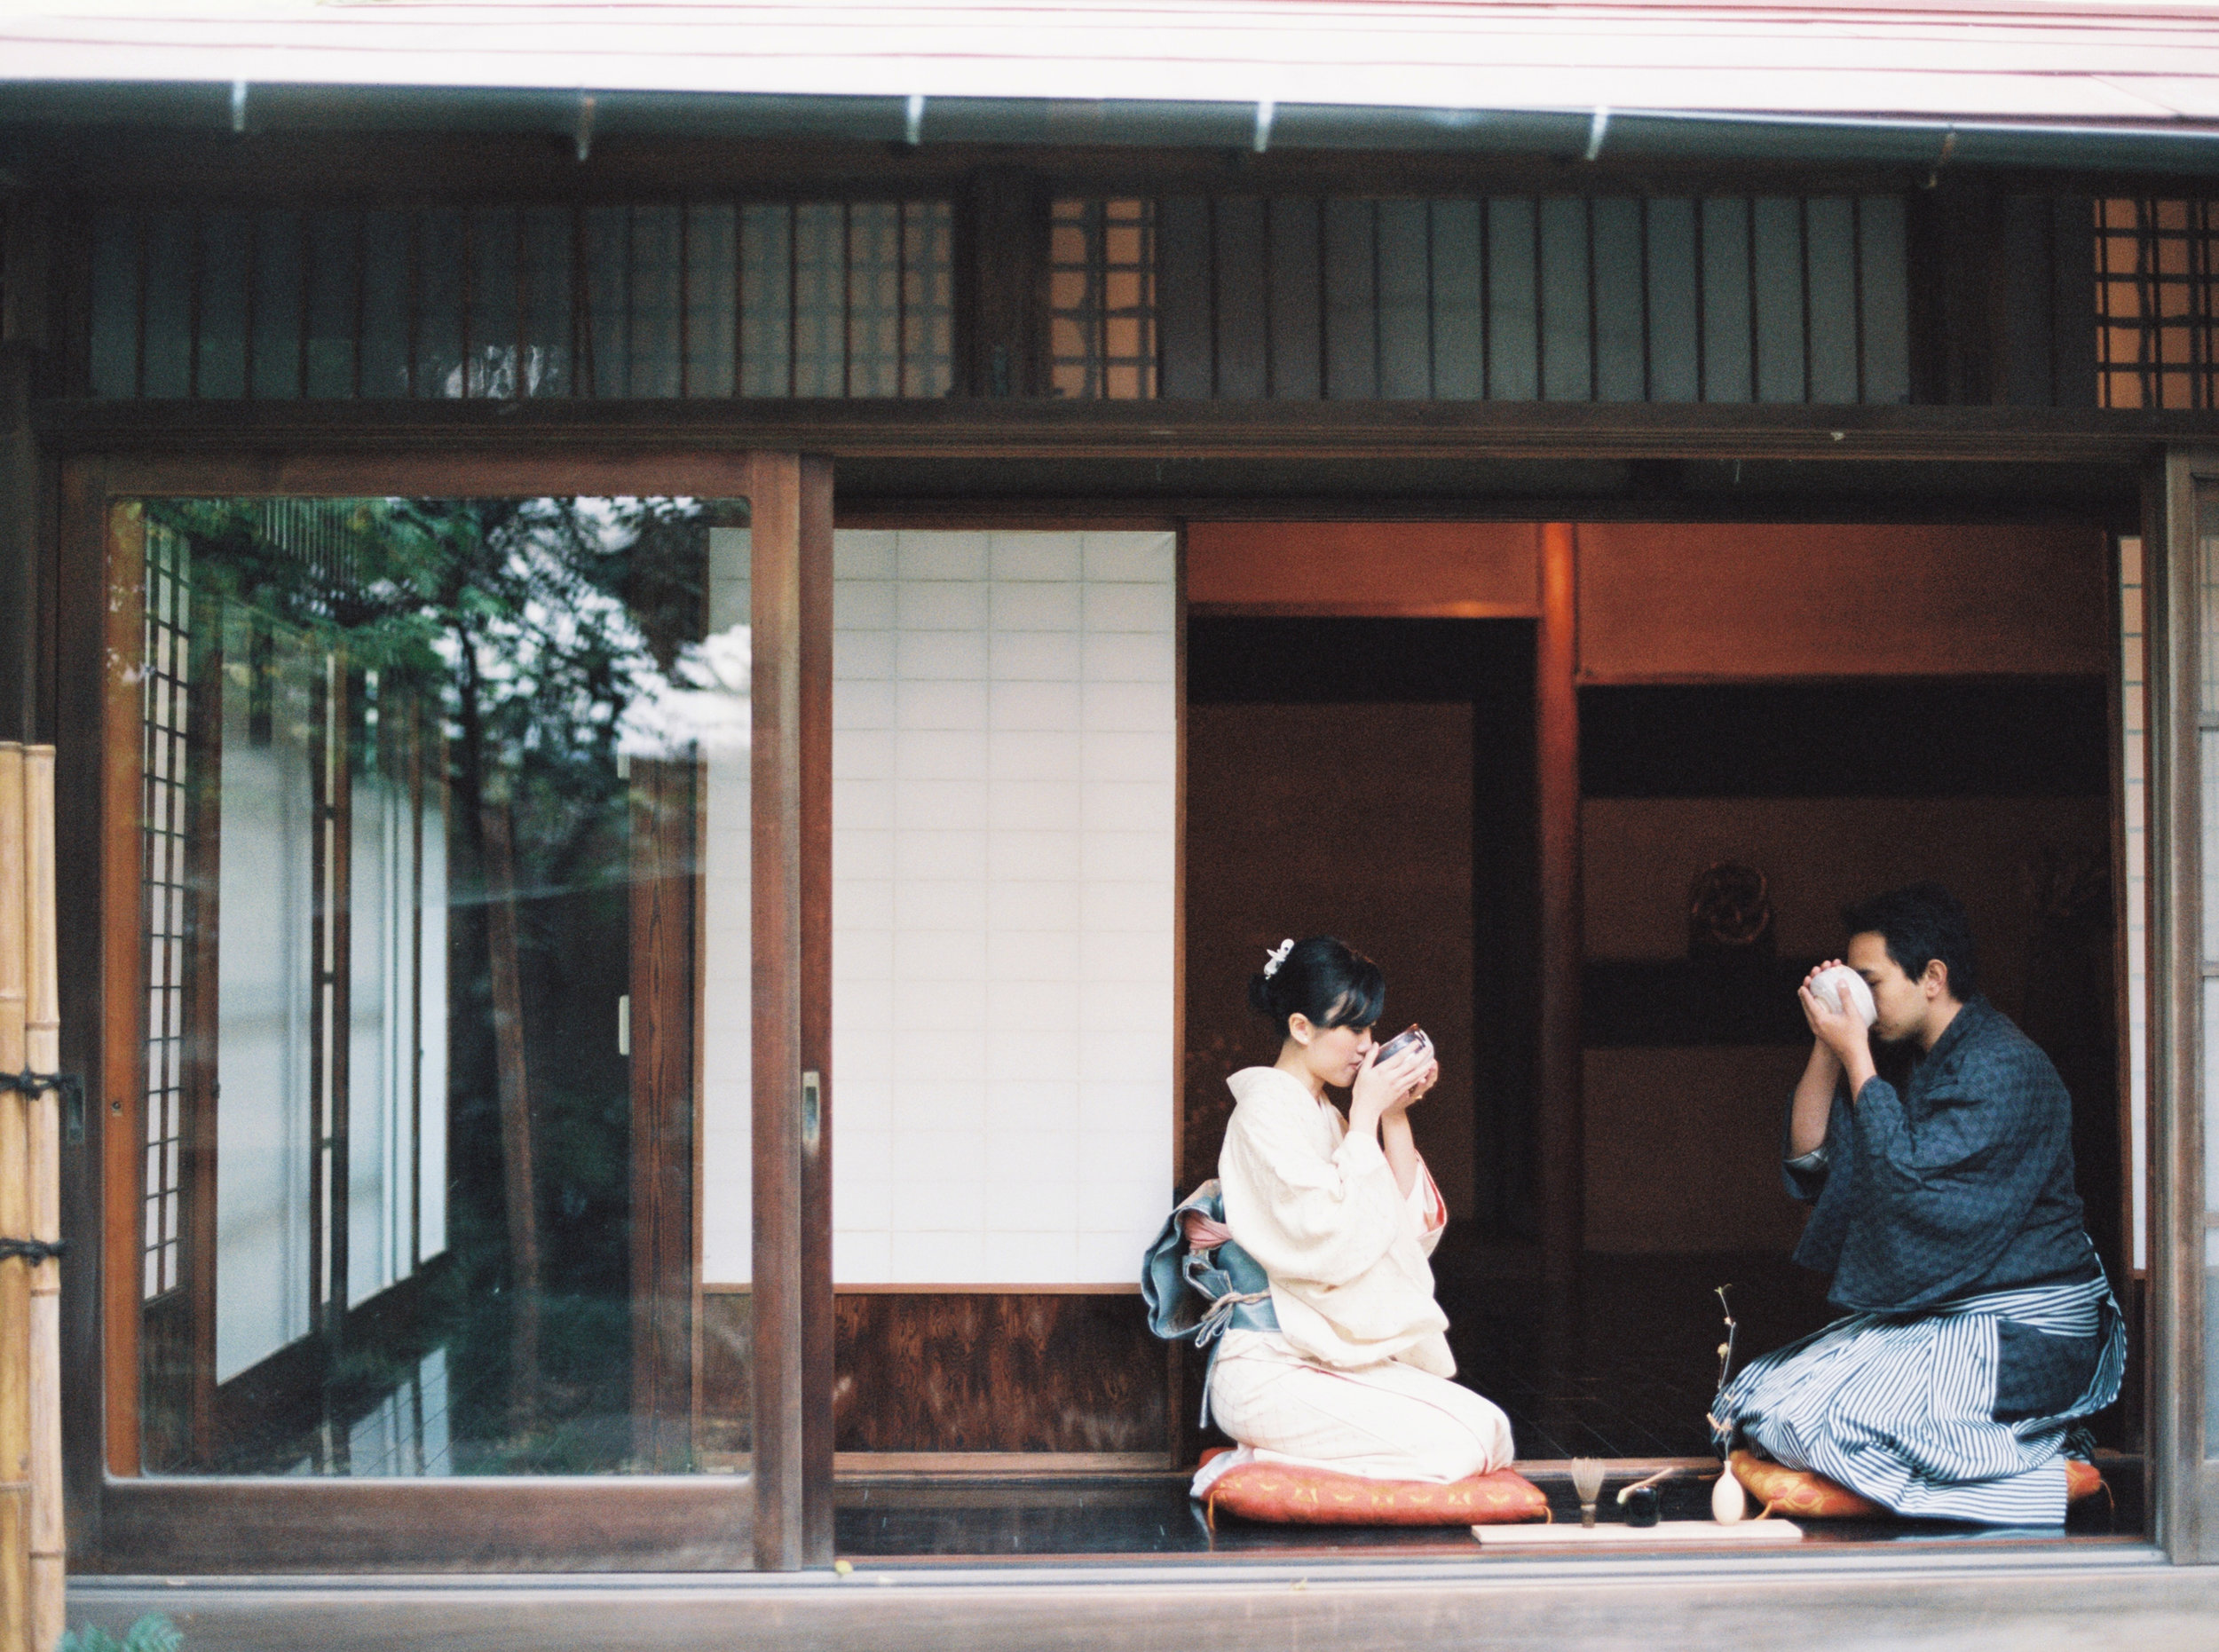 taylor-and-porter-film-photographer-japan-1-creative-travel-unearthing.tc.jpg